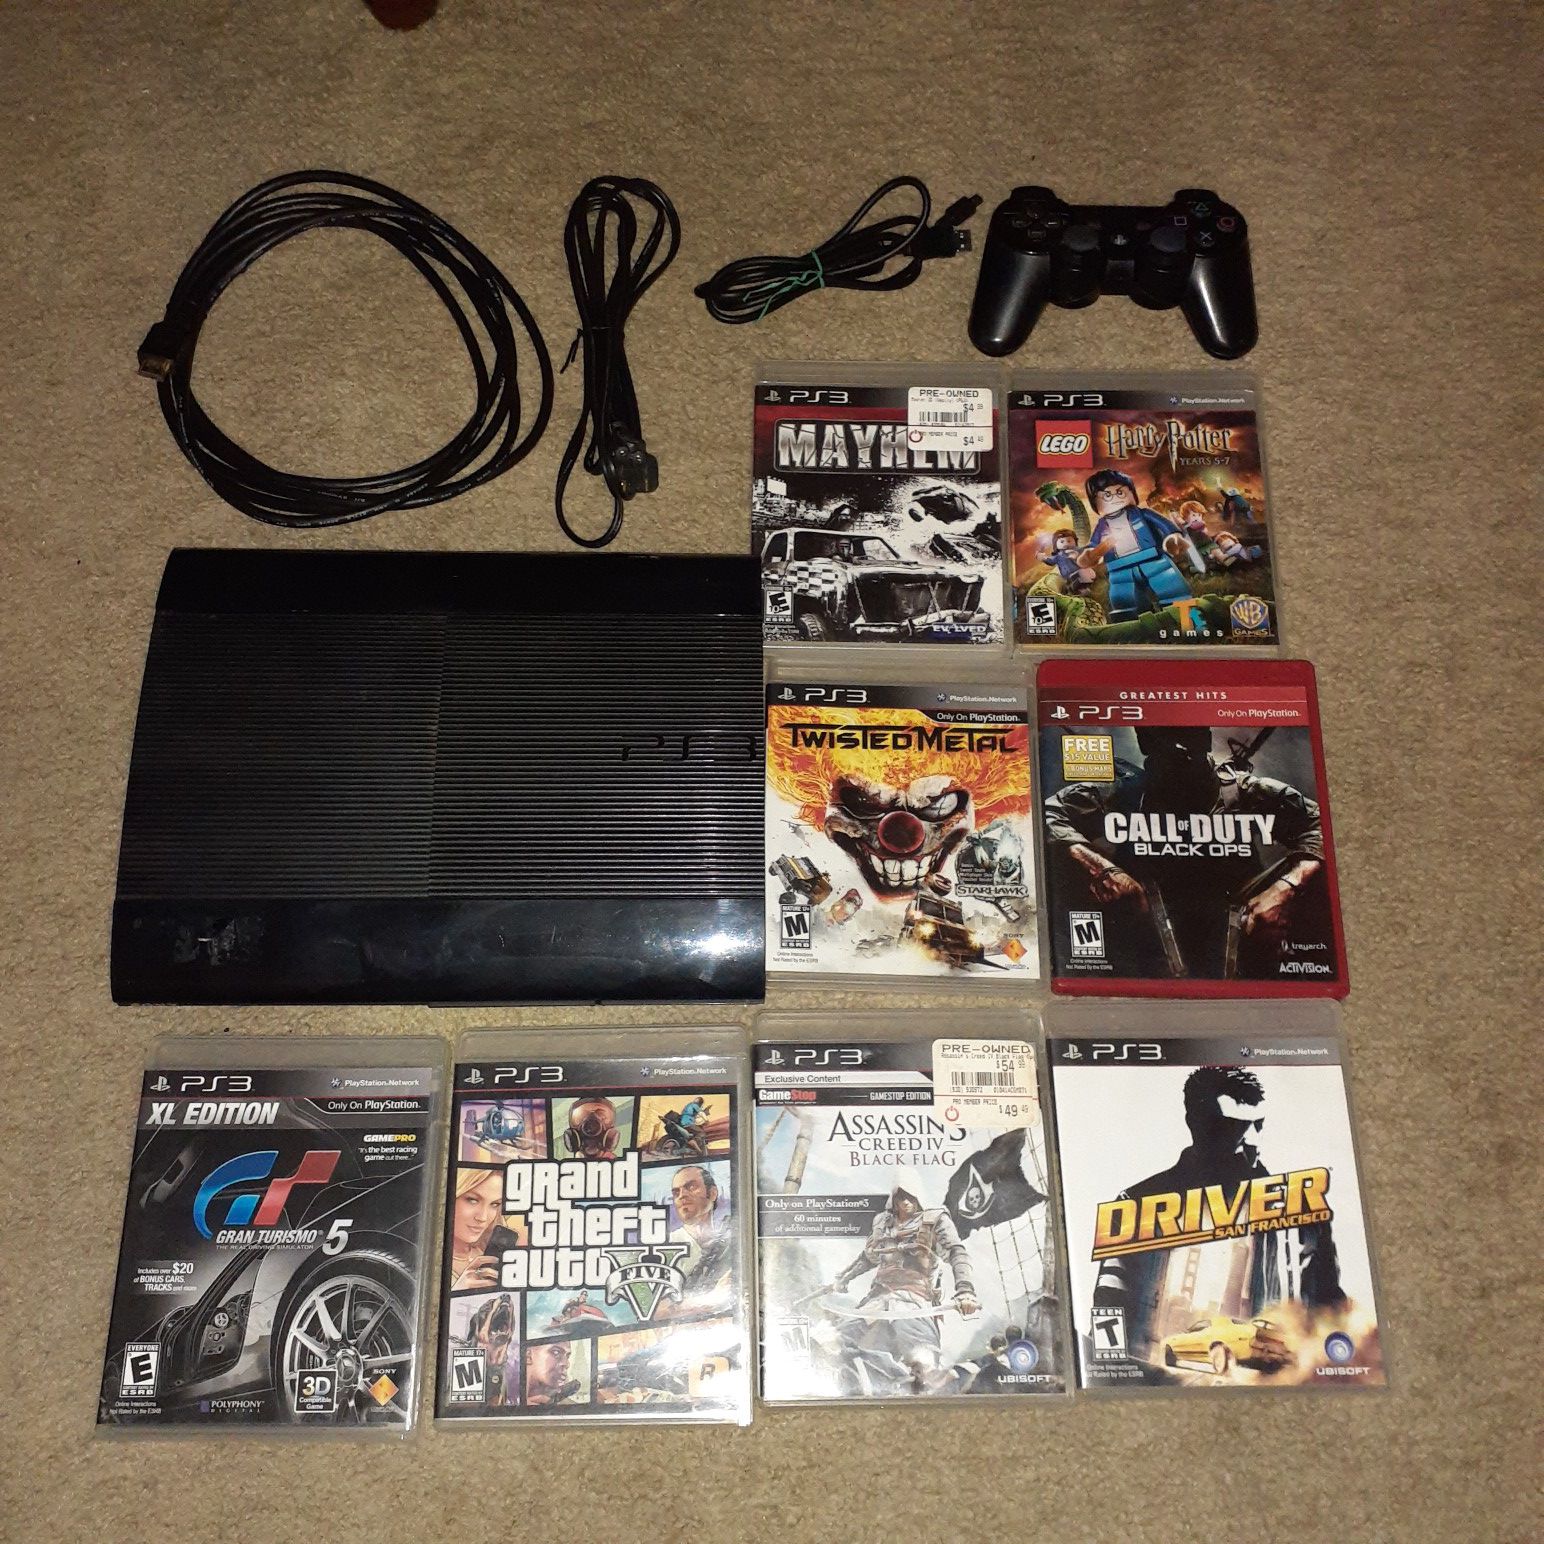 PS3 250GB and 8 games